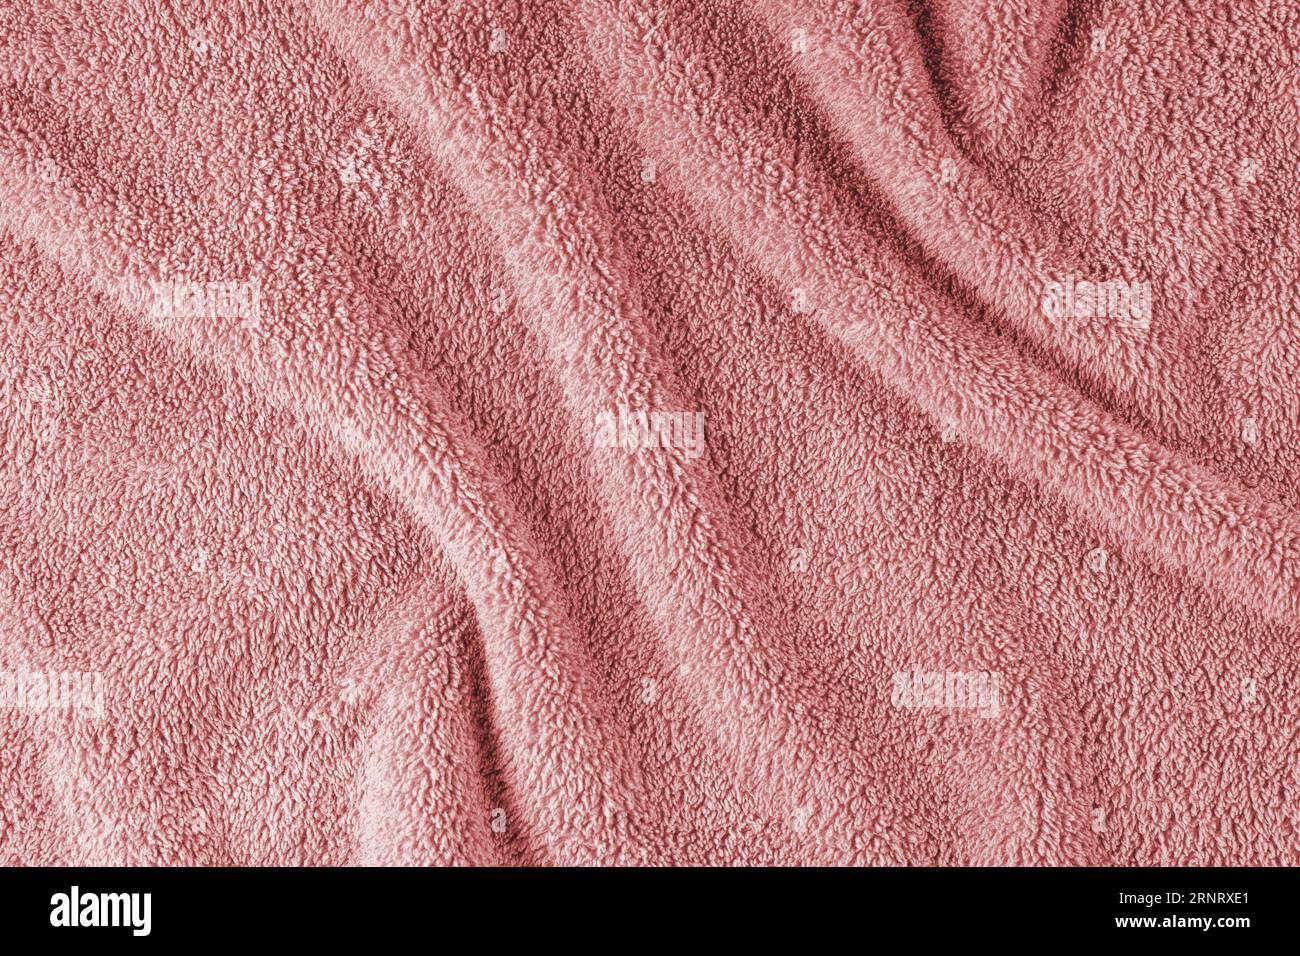 Terry cloth, red towel texture background. Wrinkled and crumped soft fluffy textile bath or beach towel material. Top view, close up. Stock Photo